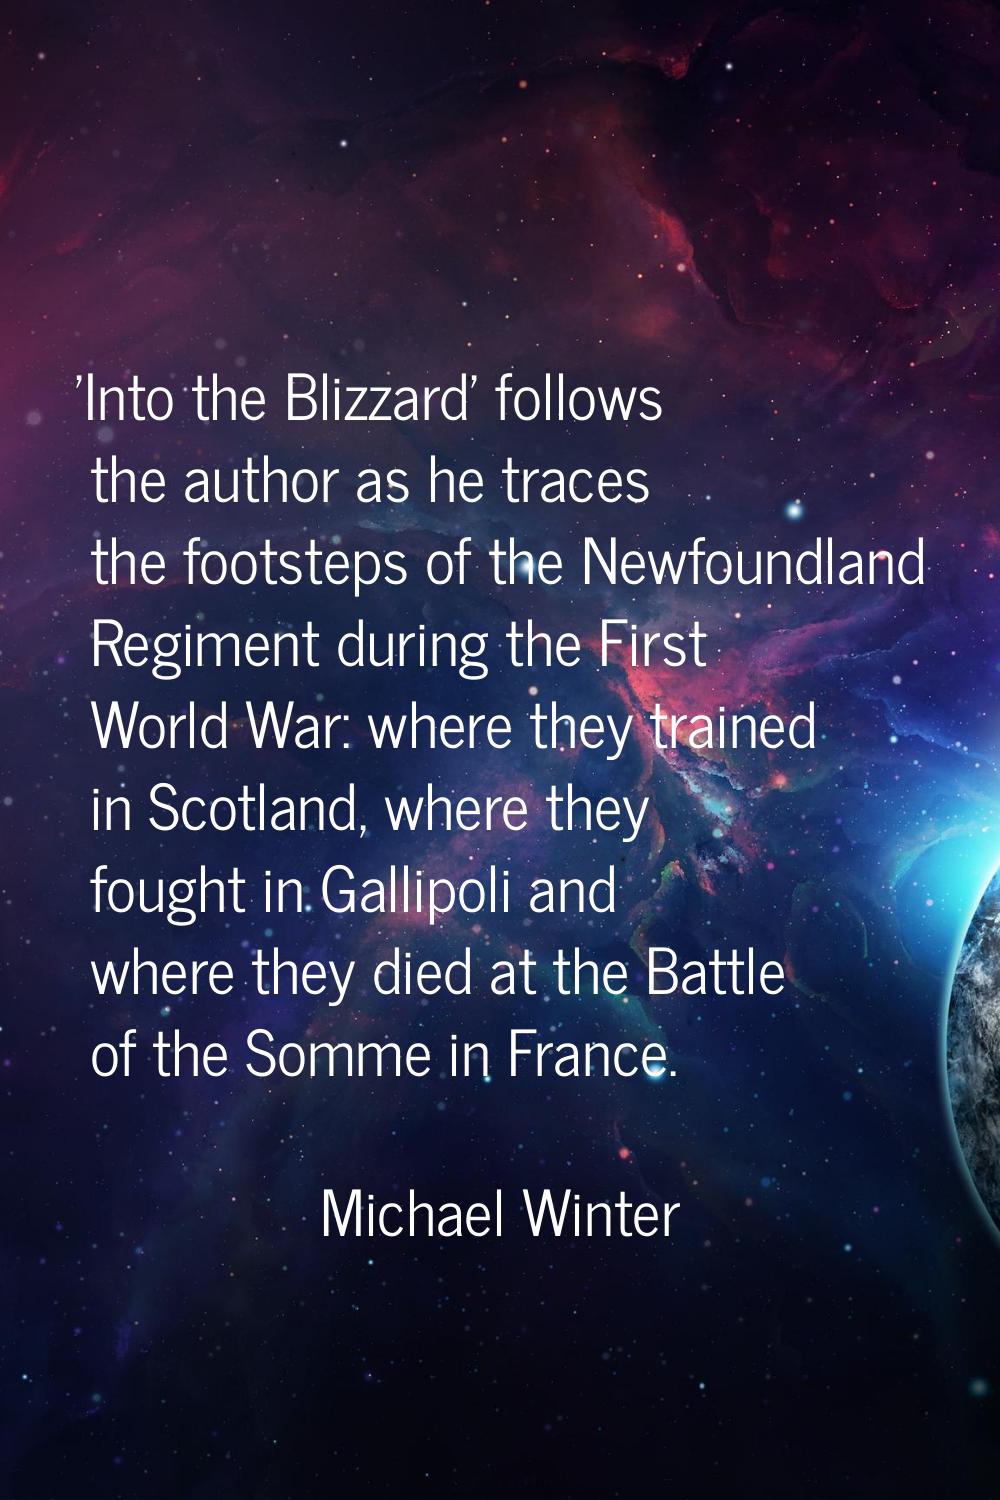 'Into the Blizzard' follows the author as he traces the footsteps of the Newfoundland Regiment duri